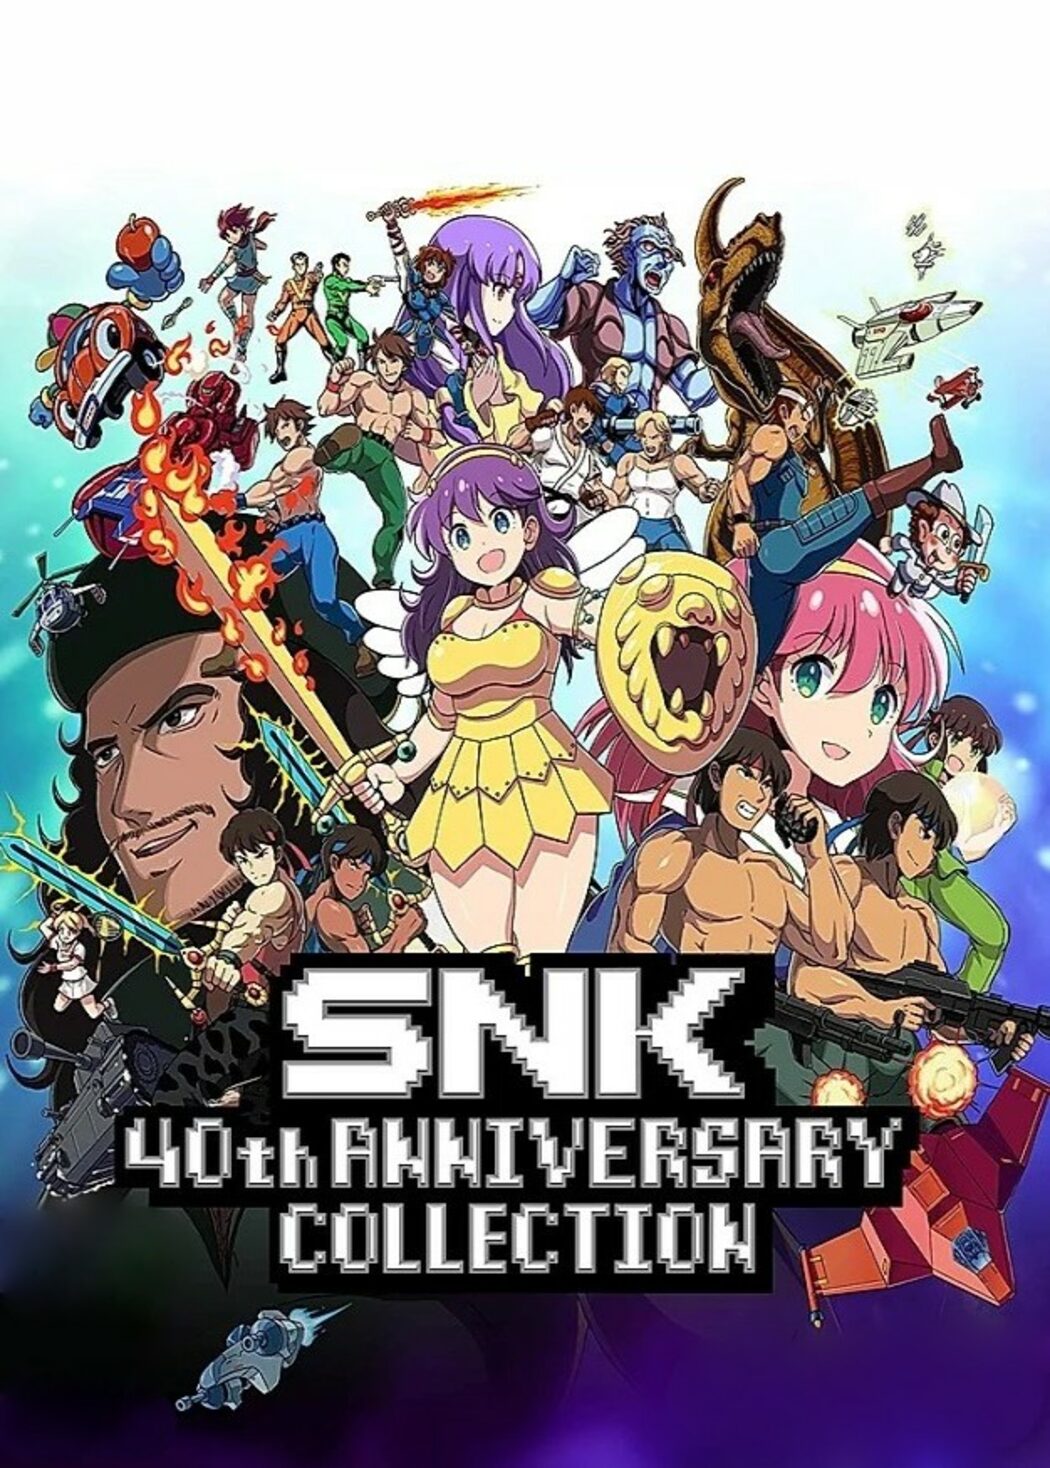 SNK 40th Anniversary Collection on